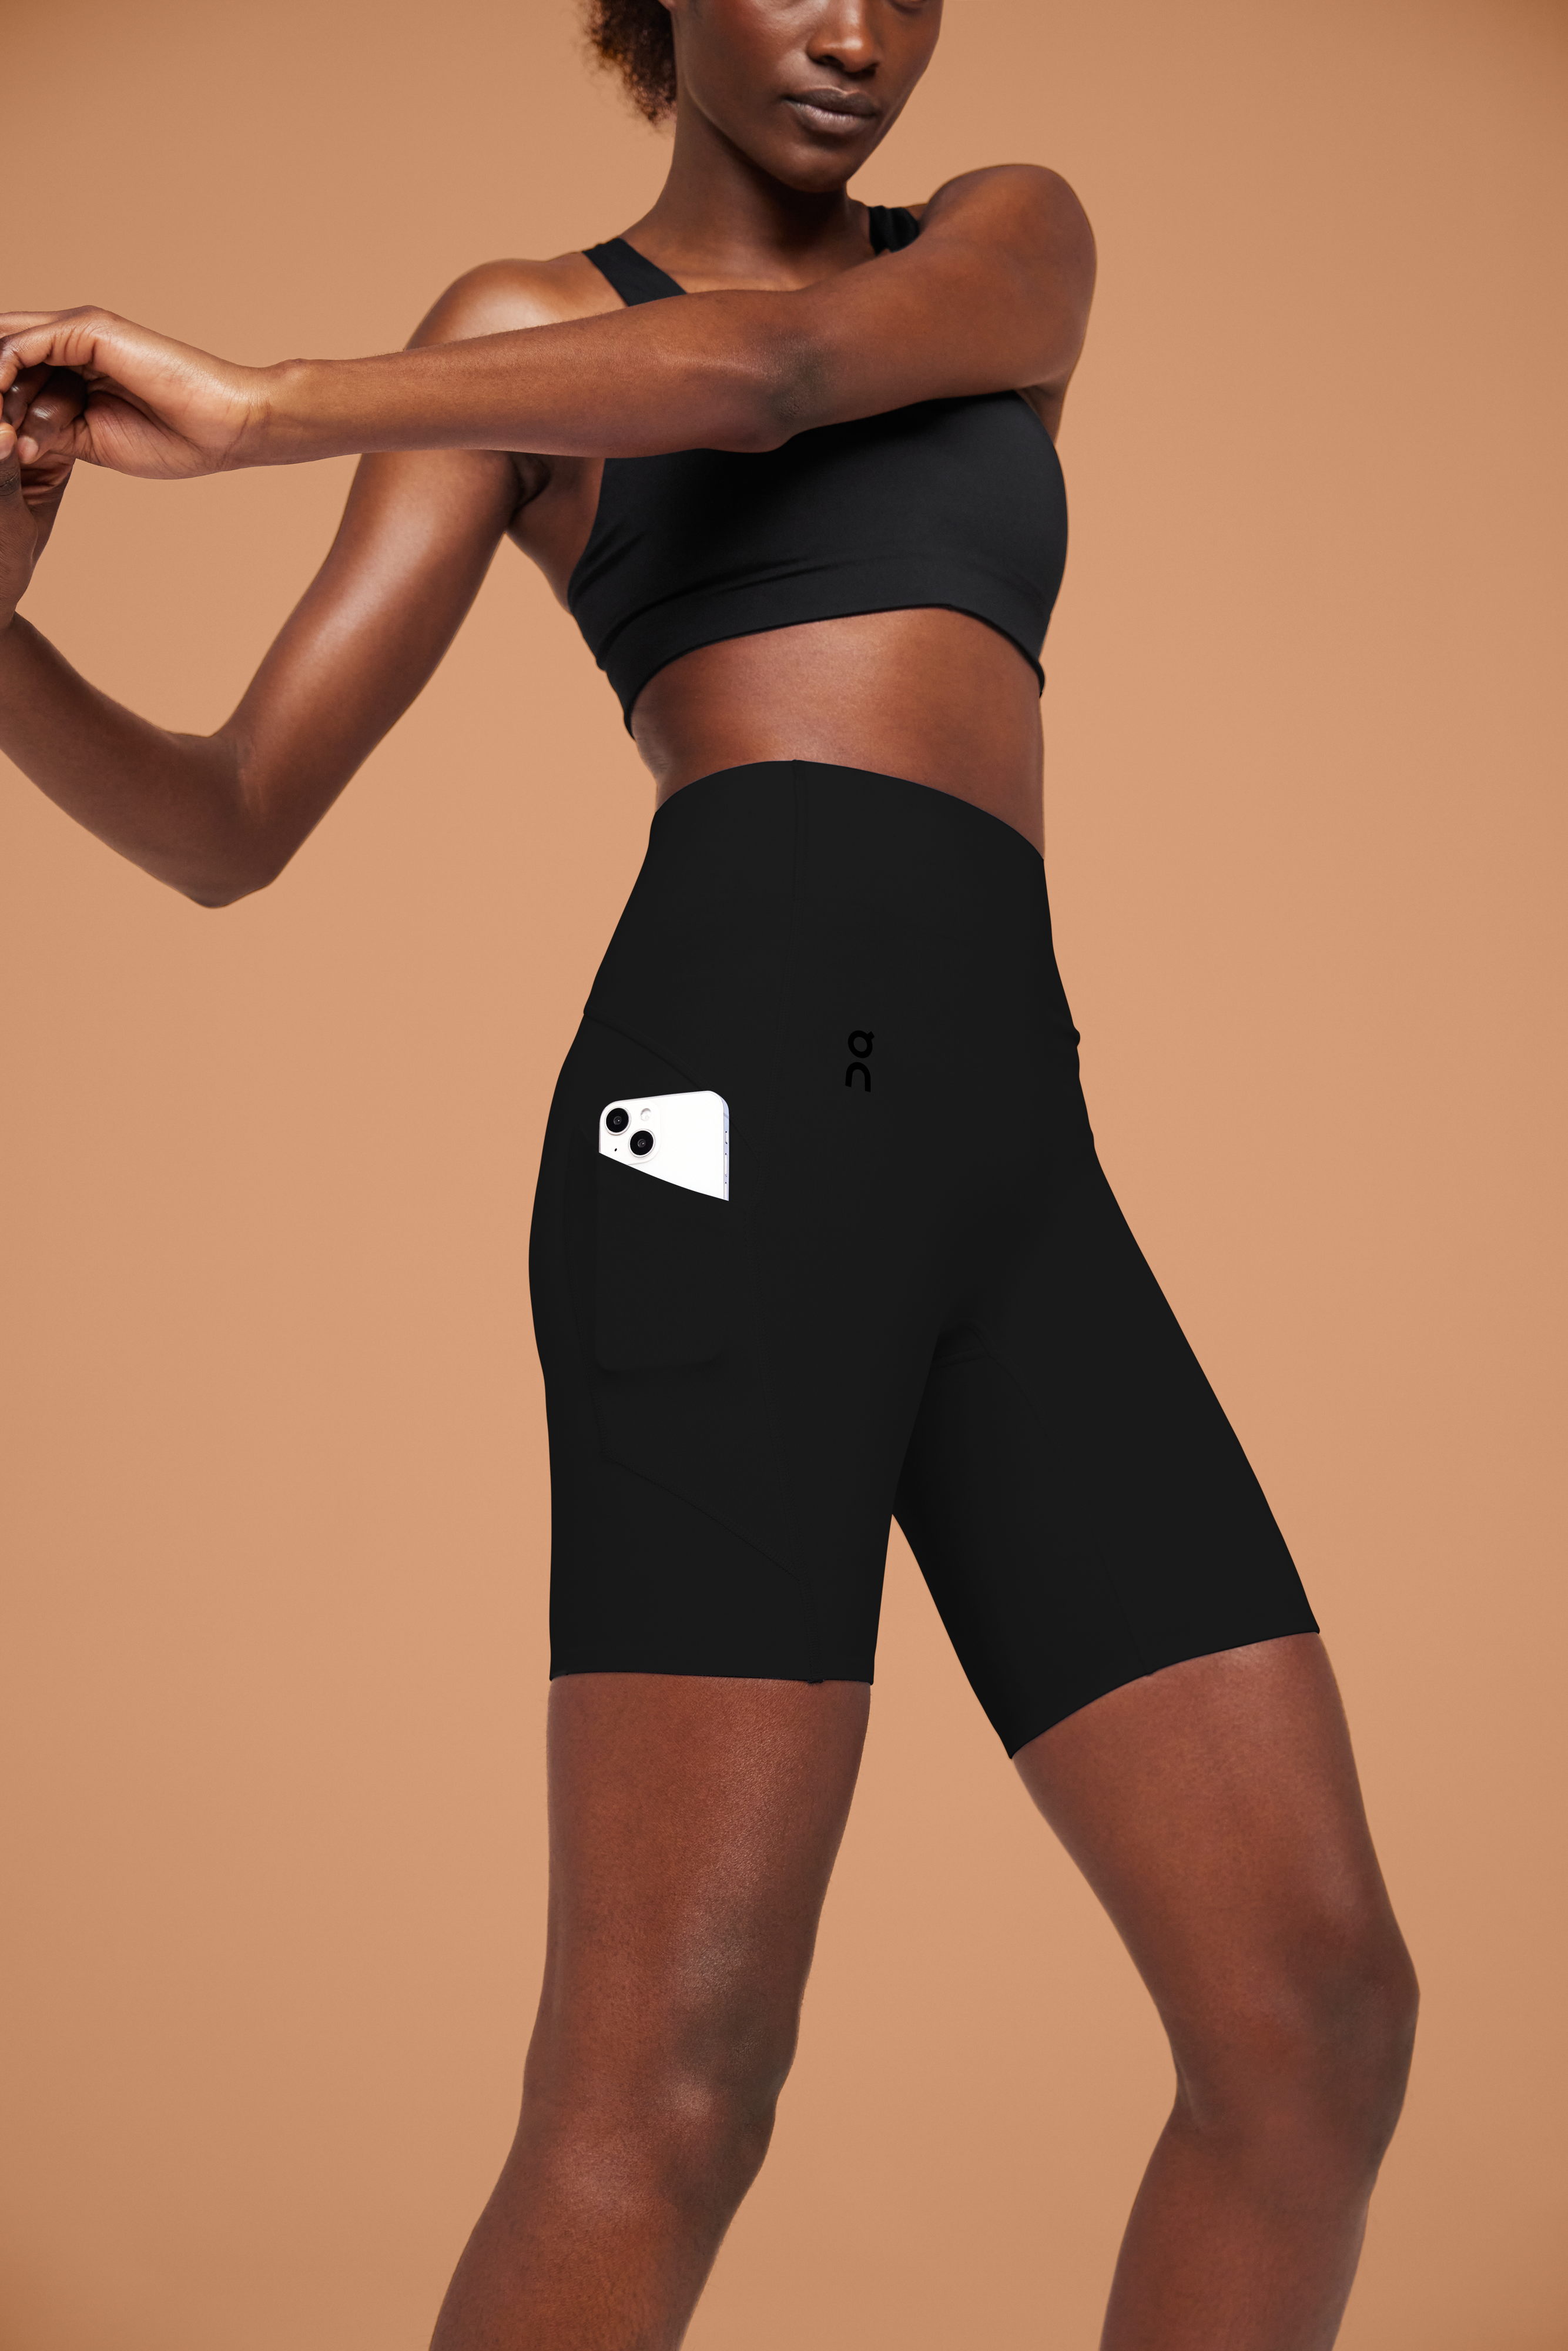 Women's Fitness Short Tights, Shop Today. Get it Tomorrow!